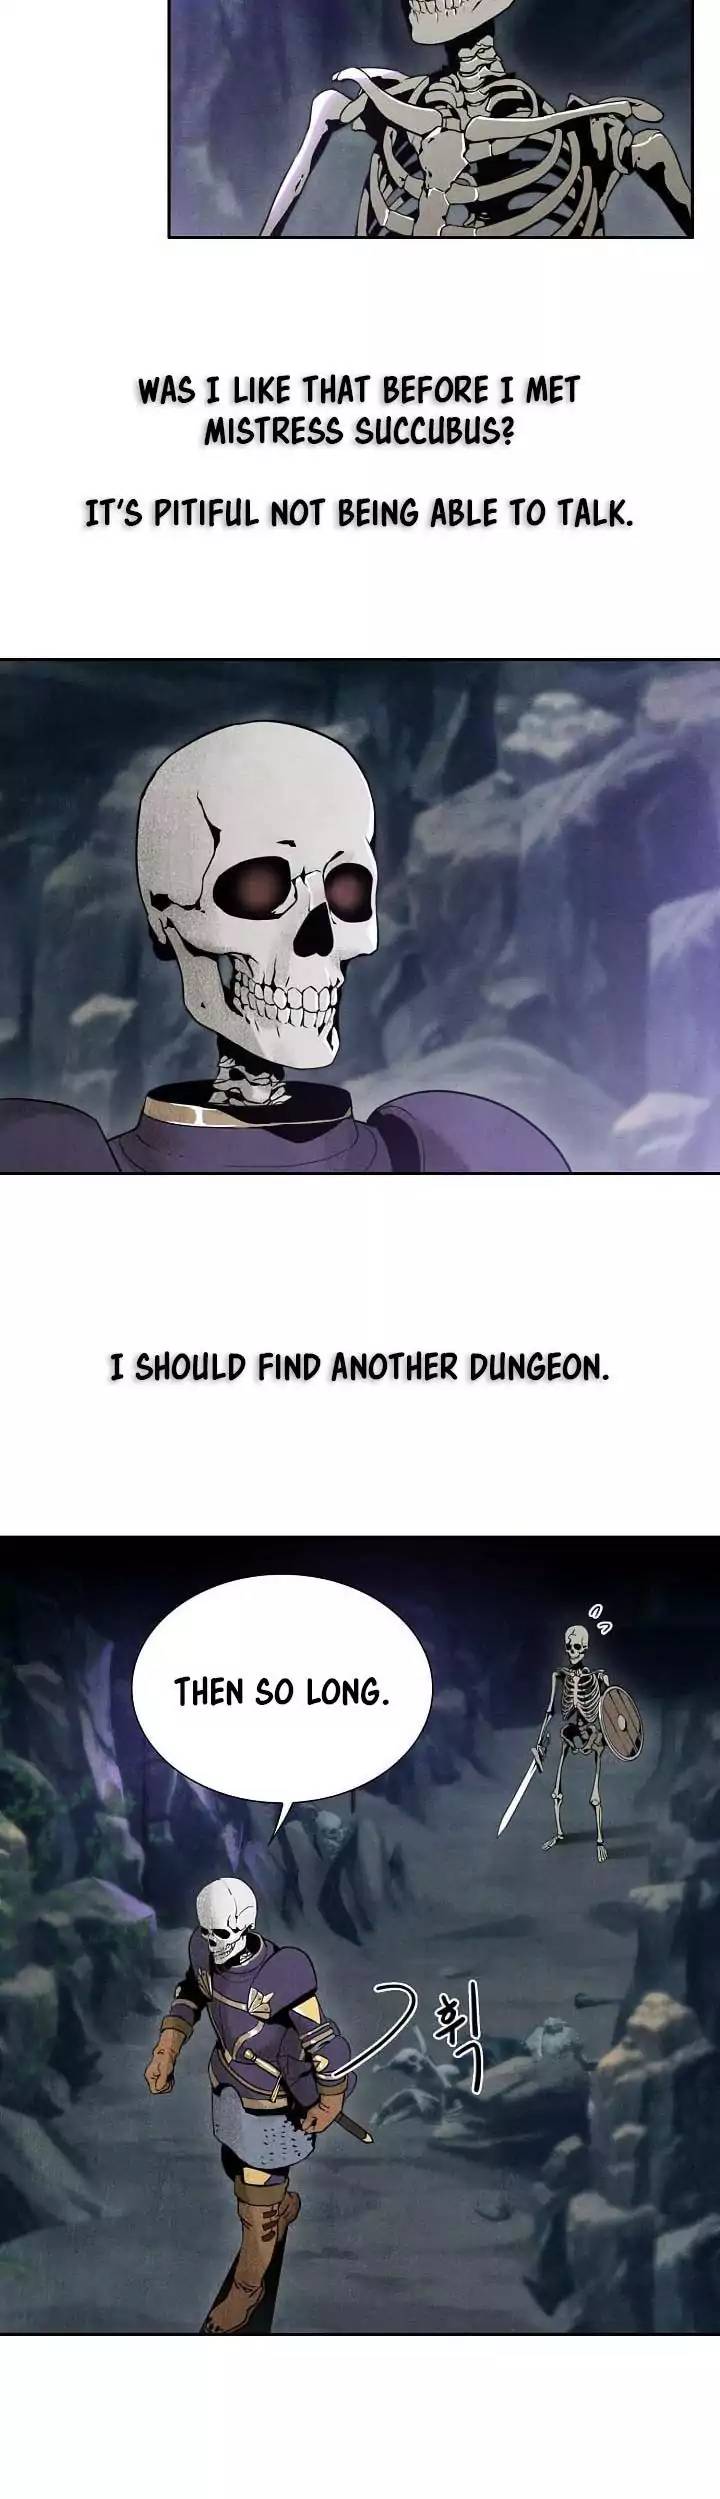 Skeleton Soldier Couldnt Protect The Dungeon 5 9